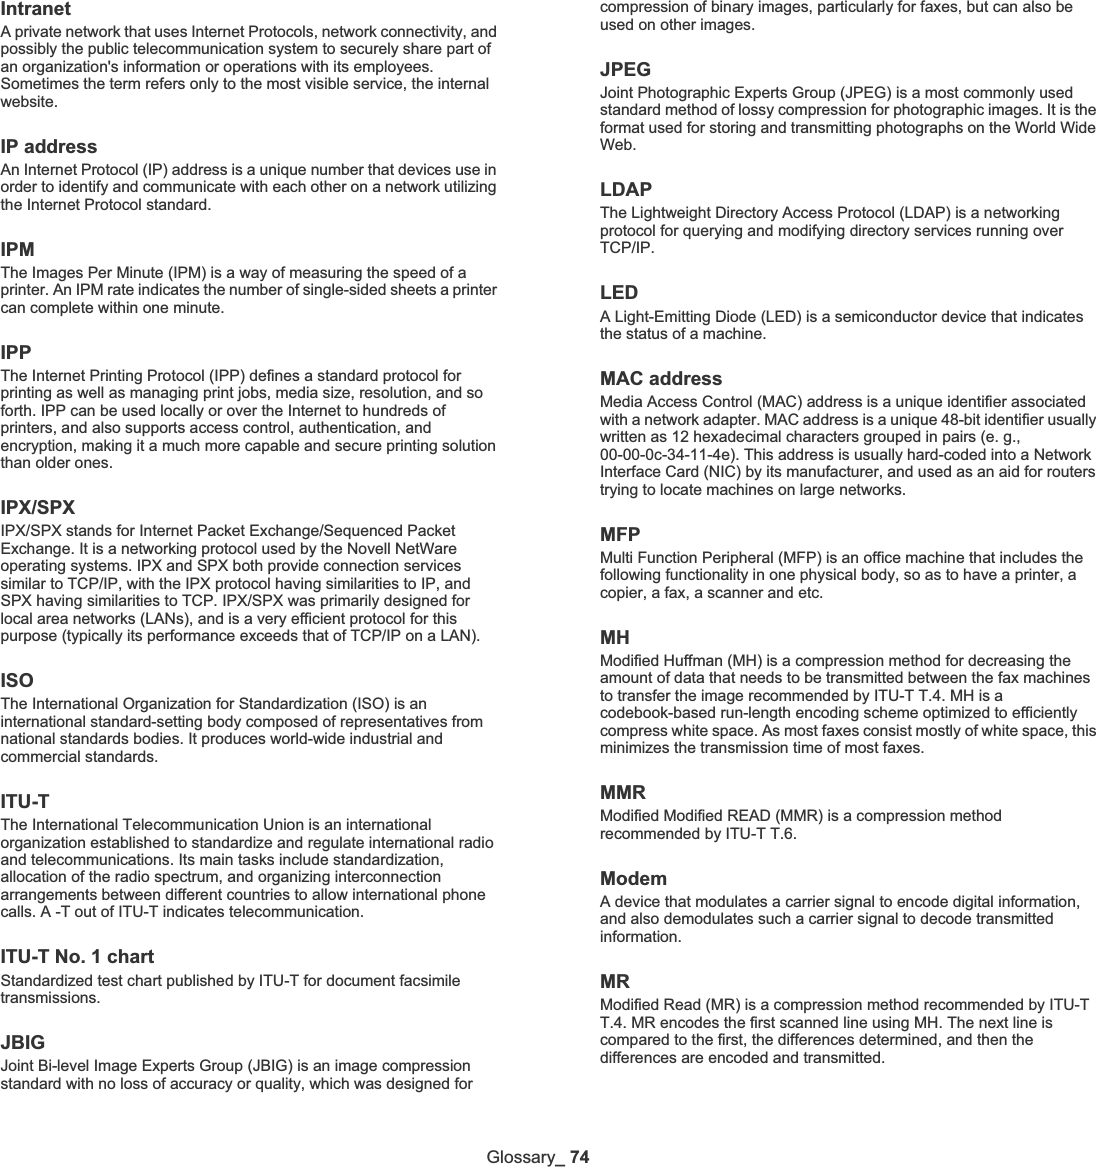 Glossary_74IntranetA private network that uses Internet Protocols, network connectivity, and possibly the public telecommunication system to securely share part of an organization&apos;s information or operations with its employees. Sometimes the term refers only to the most visible service, the internal website.IP addressAn Internet Protocol (IP) address is a unique number that devices use in order to identify and communicate with each other on a network utilizing the Internet Protocol standard.IPMThe Images Per Minute (IPM) is a way of measuring the speed of a printer. An IPM rate indicates the number of single-sided sheets a printer can complete within one minute.IPPThe Internet Printing Protocol (IPP) defines a standard protocol for printing as well as managing print jobs, media size, resolution, and so forth. IPP can be used locally or over the Internet to hundreds of printers, and also supports access control, authentication, and encryption, making it a much more capable and secure printing solution than older ones.IPX/SPXIPX/SPX stands for Internet Packet Exchange/Sequenced Packet Exchange. It is a networking protocol used by the Novell NetWare operating systems. IPX and SPX both provide connection services similar to TCP/IP, with the IPX protocol having similarities to IP, and SPX having similarities to TCP. IPX/SPX was primarily designed for local area networks (LANs), and is a very efficient protocol for this purpose (typically its performance exceeds that of TCP/IP on a LAN).ISOThe International Organization for Standardization (ISO) is an international standard-setting body composed of representatives from national standards bodies. It produces world-wide industrial and commercial standards.ITU-TThe International Telecommunication Union is an international organization established to standardize and regulate international radio and telecommunications. Its main tasks include standardization, allocation of the radio spectrum, and organizing interconnection arrangements between different countries to allow international phone calls. A -T out of ITU-T indicates telecommunication.ITU-T No. 1 chartStandardized test chart published by ITU-T for document facsimile transmissions.JBIGJoint Bi-level Image Experts Group (JBIG) is an image compression standard with no loss of accuracy or quality, which was designed for compression of binary images, particularly for faxes, but can also be used on other images.JPEGJoint Photographic Experts Group (JPEG) is a most commonly used standard method of lossy compression for photographic images. It is the format used for storing and transmitting photographs on the World Wide Web.LDAPThe Lightweight Directory Access Protocol (LDAP) is a networking protocol for querying and modifying directory services running over TCP/IP.LEDA Light-Emitting Diode (LED) is a semiconductor device that indicates the status of a machine.  MAC addressMedia Access Control (MAC) address is a unique identifier associated with a network adapter. MAC address is a unique 48-bit identifier usually written as 12 hexadecimal characters grouped in pairs (e. g., 00-00-0c-34-11-4e). This address is usually hard-coded into a Network Interface Card (NIC) by its manufacturer, and used as an aid for routers trying to locate machines on large networks.MFPMulti Function Peripheral (MFP) is an office machine that includes the following functionality in one physical body, so as to have a printer, a copier, a fax, a scanner and etc.MHModified Huffman (MH) is a compression method for decreasing the amount of data that needs to be transmitted between the fax machines to transfer the image recommended by ITU-T T.4. MH is a codebook-based run-length encoding scheme optimized to efficiently compress white space. As most faxes consist mostly of white space, this minimizes the transmission time of most faxes. MMRModified Modified READ (MMR) is a compression method recommended by ITU-T T.6.ModemA device that modulates a carrier signal to encode digital information, and also demodulates such a carrier signal to decode transmitted information.MRModified Read (MR) is a compression method recommended by ITU-T T.4. MR encodes the first scanned line using MH. The next line is compared to the first, the differences determined, and then the differences are encoded and transmitted.